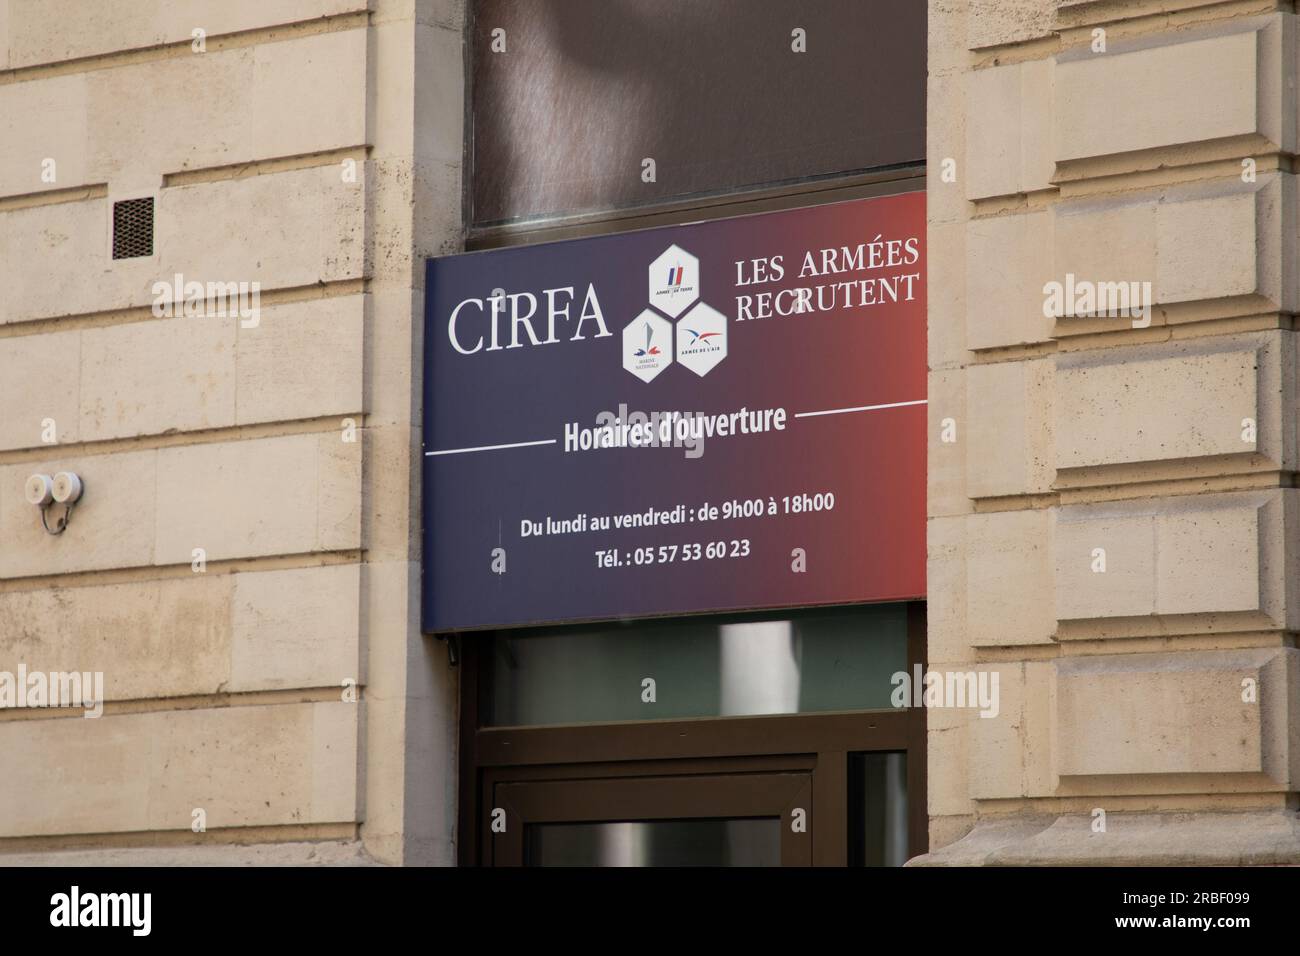 Bordeaux , France - 07 01 2023 : CIRFA logo brand and text sign french Armed Forces Information and Recruitment Center sign on entrance office facade Stock Photo